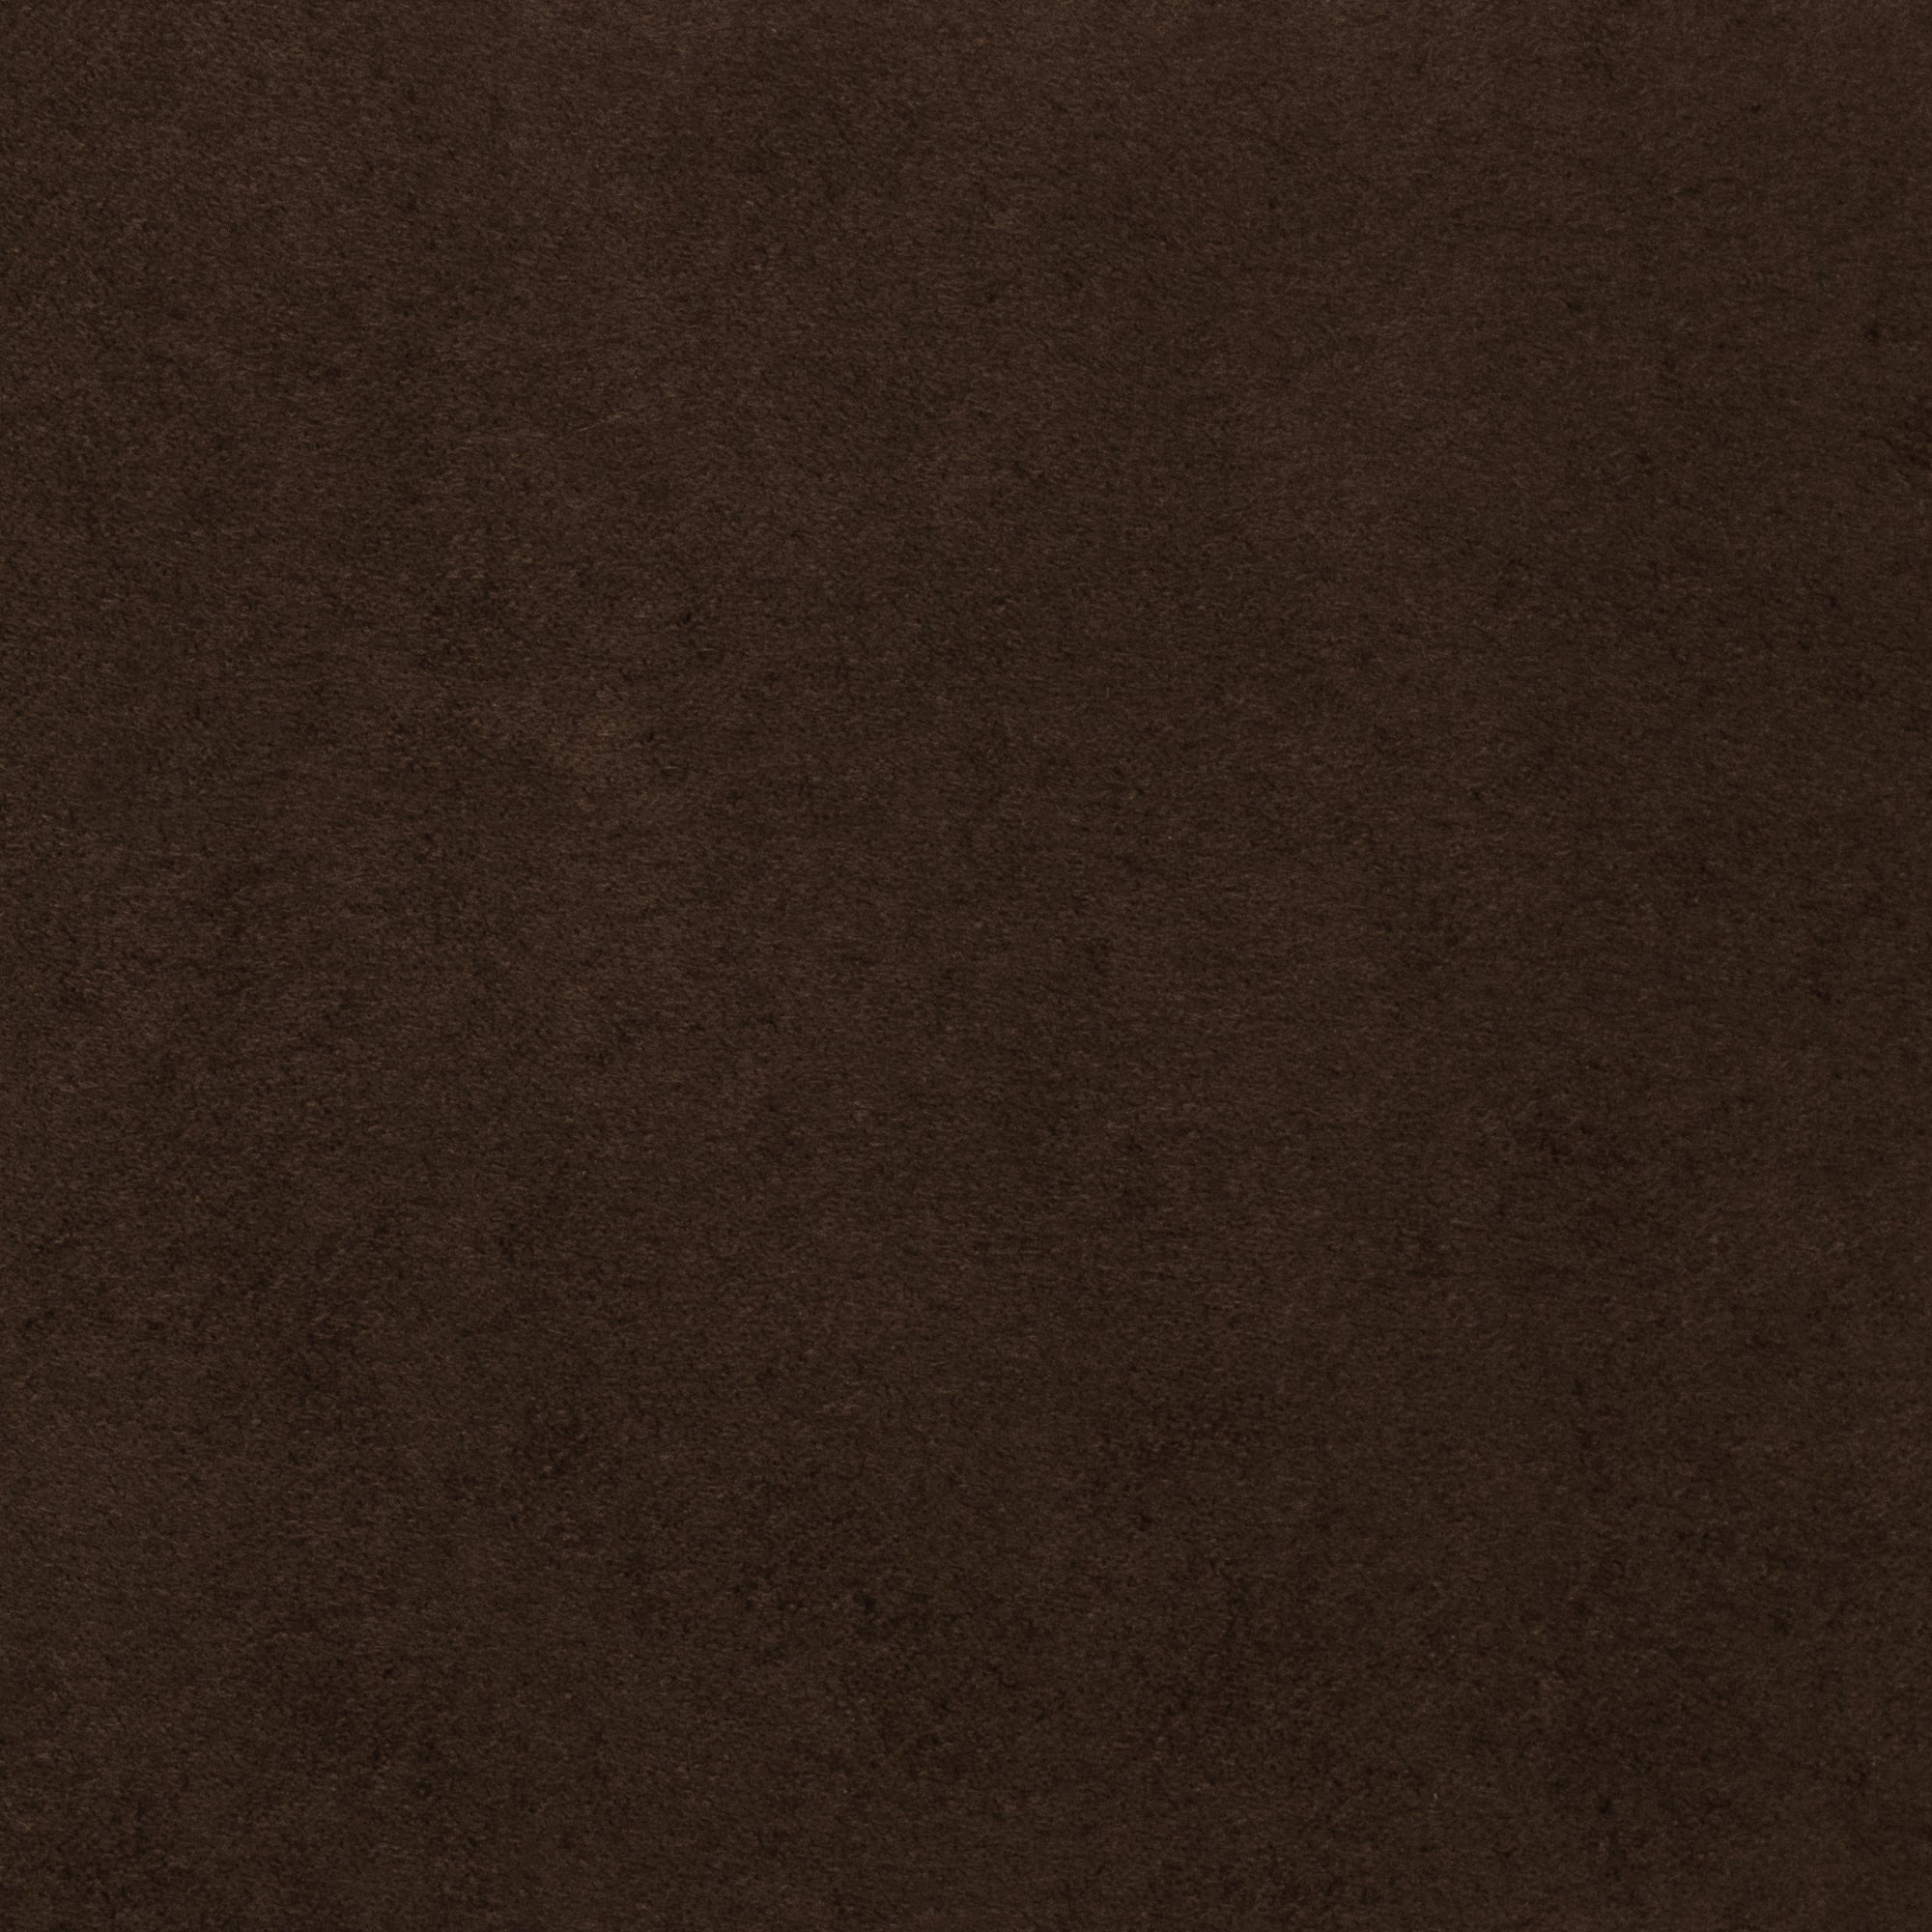 Dark brown leather material with nice texture